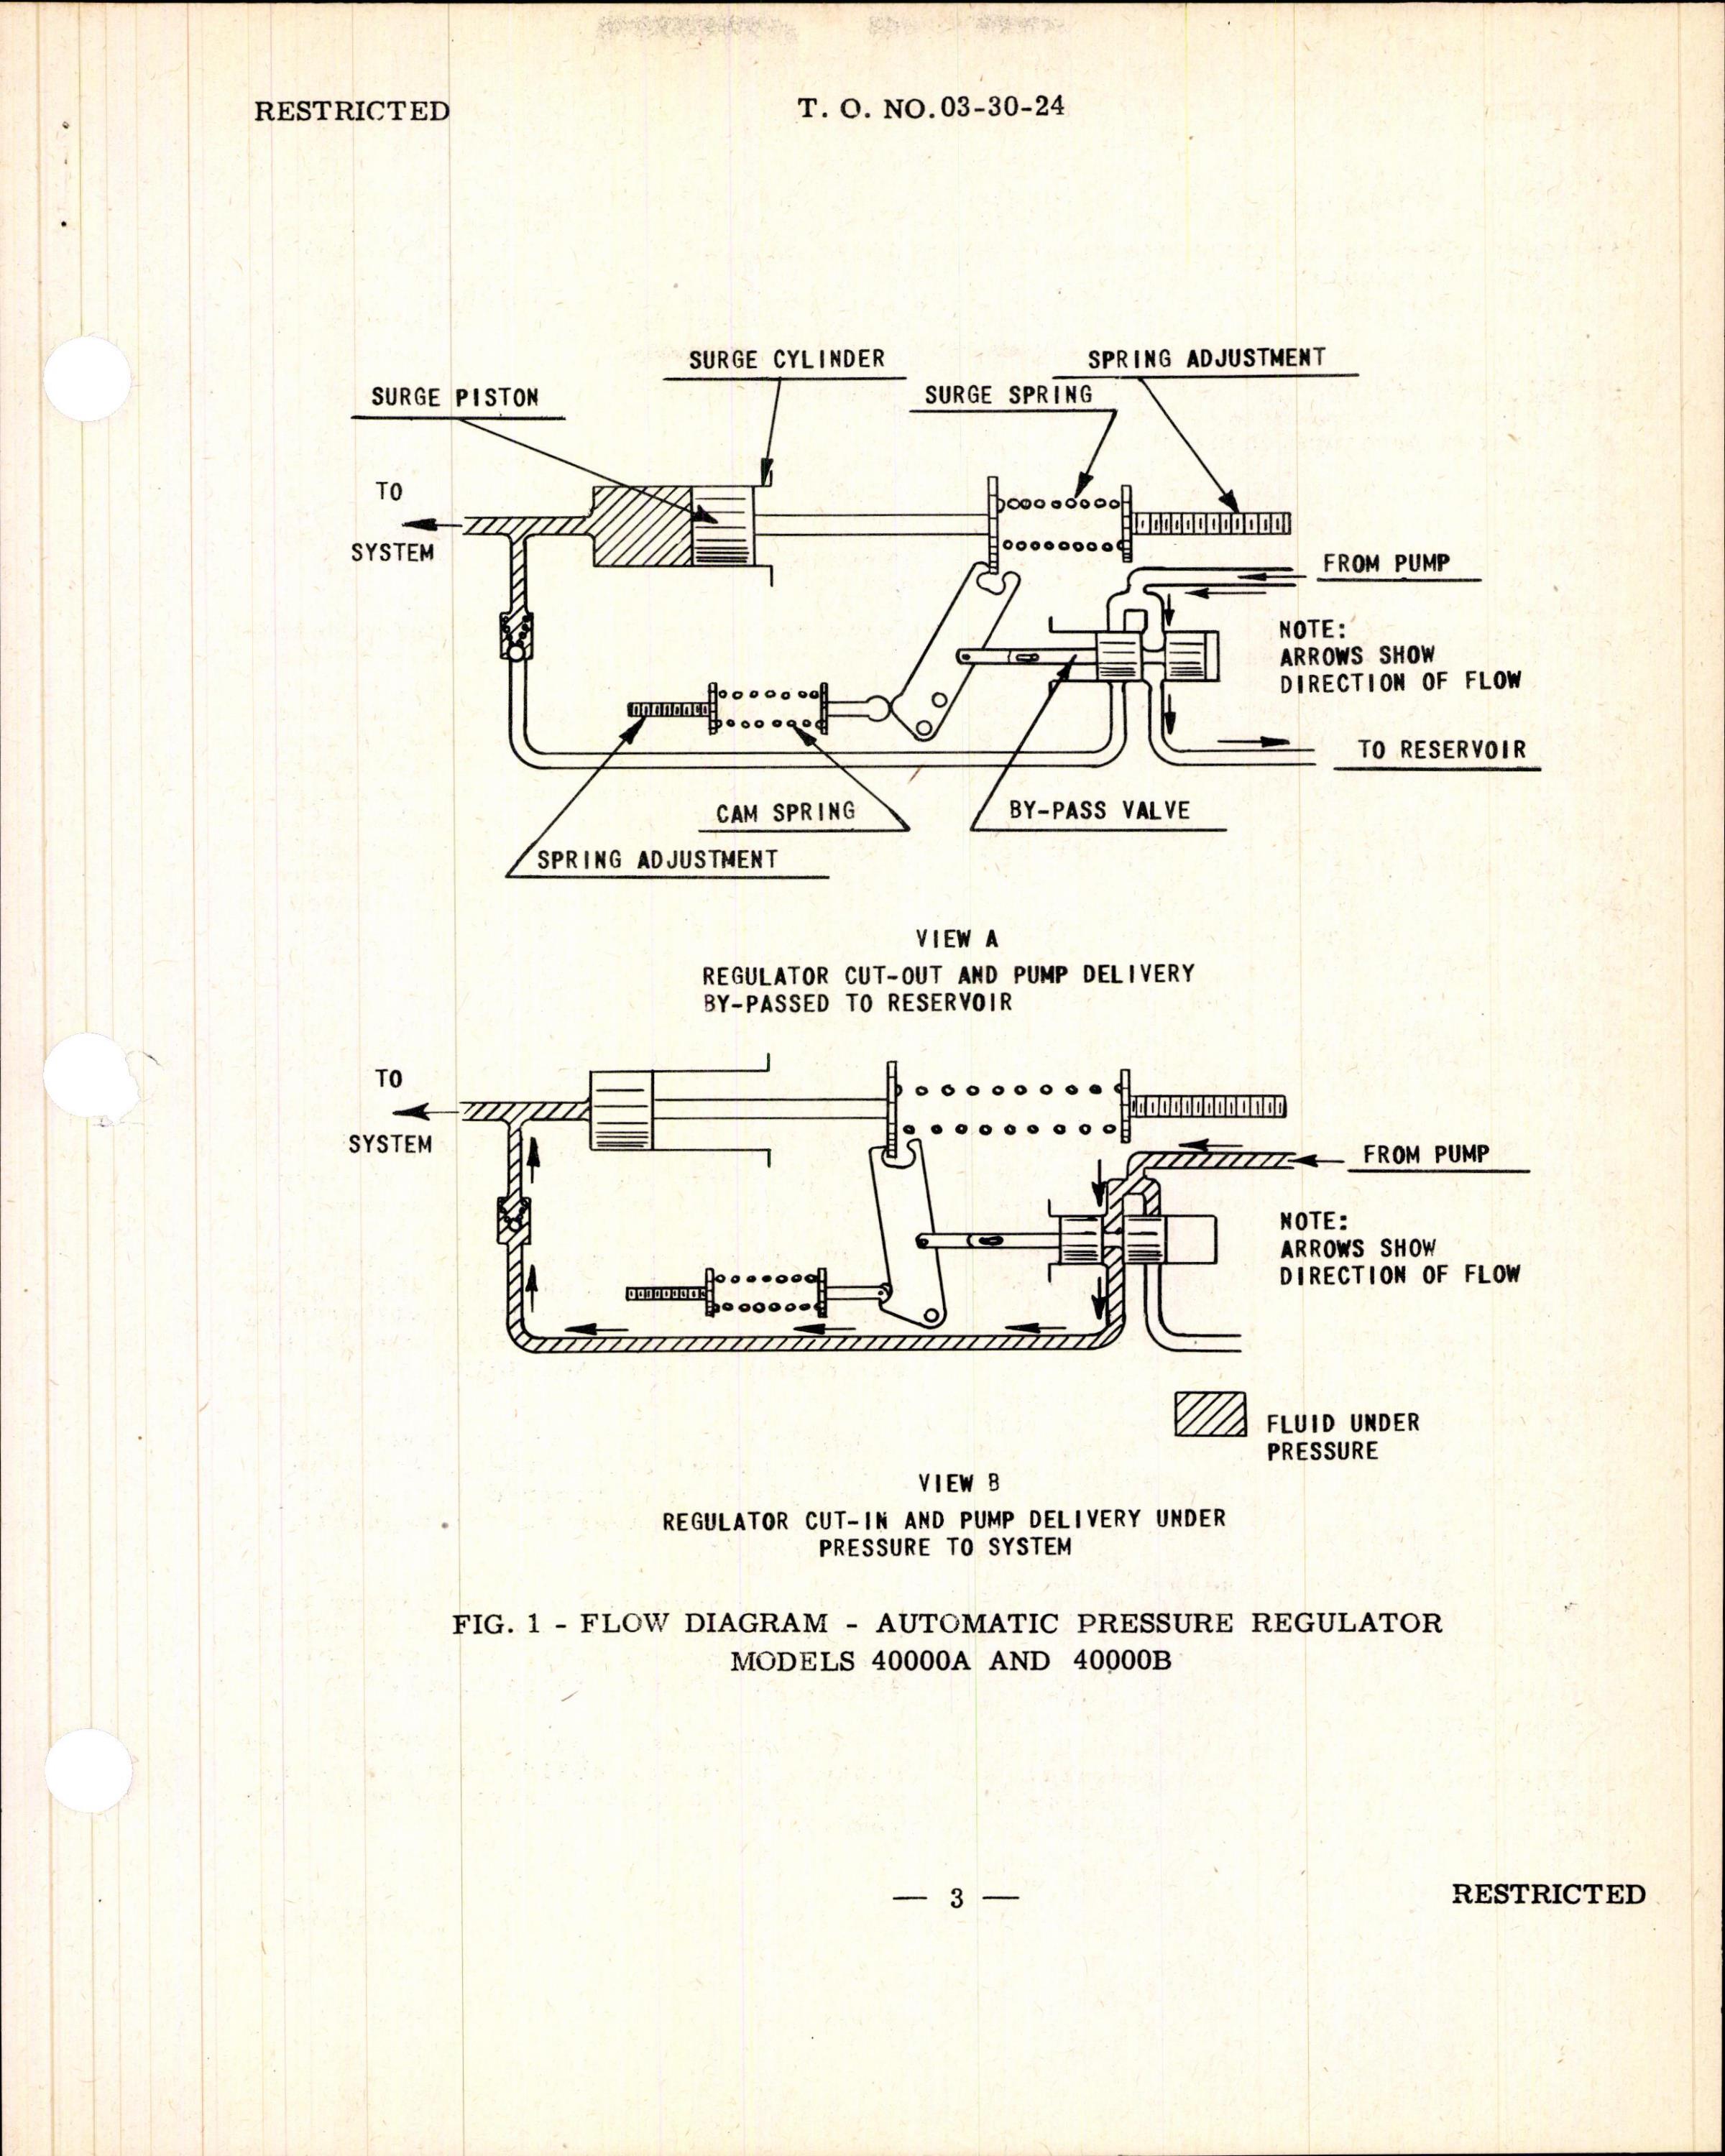 Sample page 3 from AirCorps Library document: Instructions for Automatic Pressure Regulator Hydraulic System